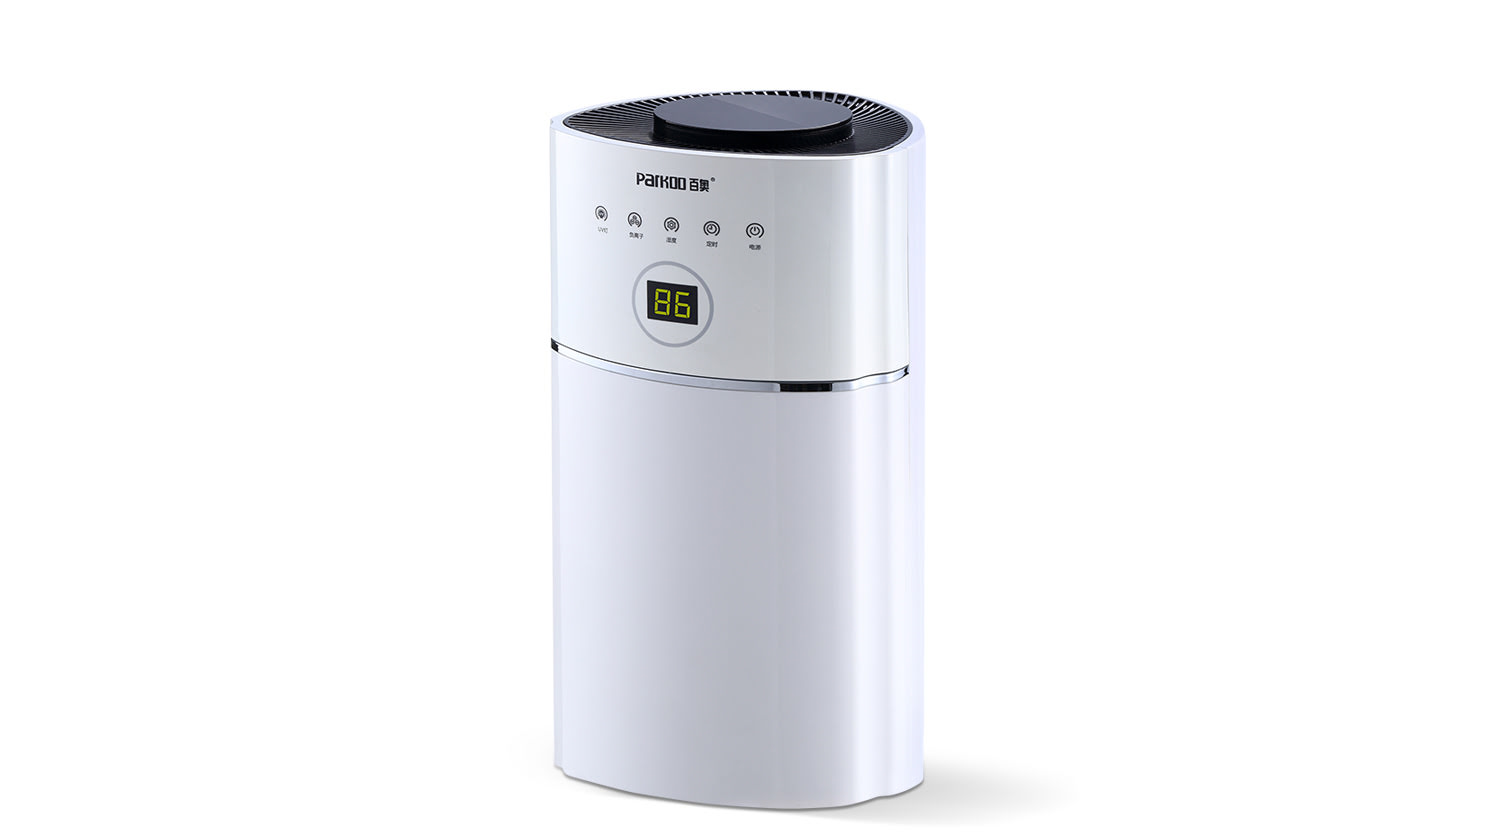 This dehumidifier is the best choice